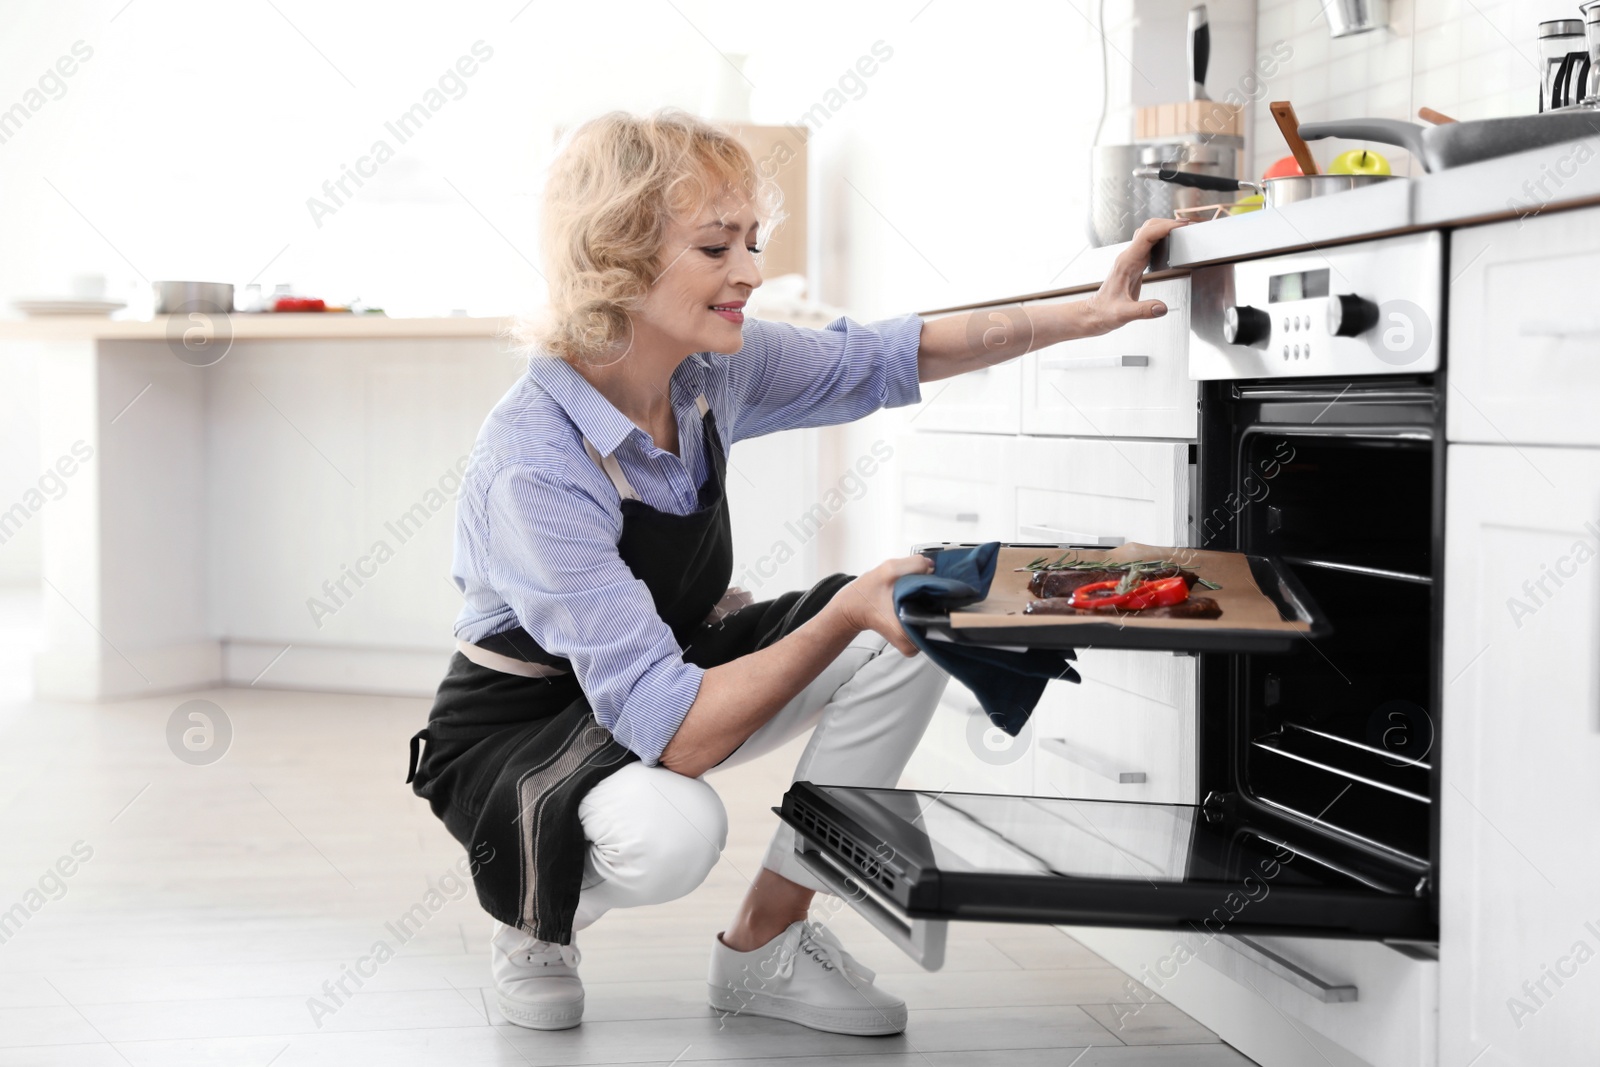 Photo of Professional chef putting meat into oven in kitchen